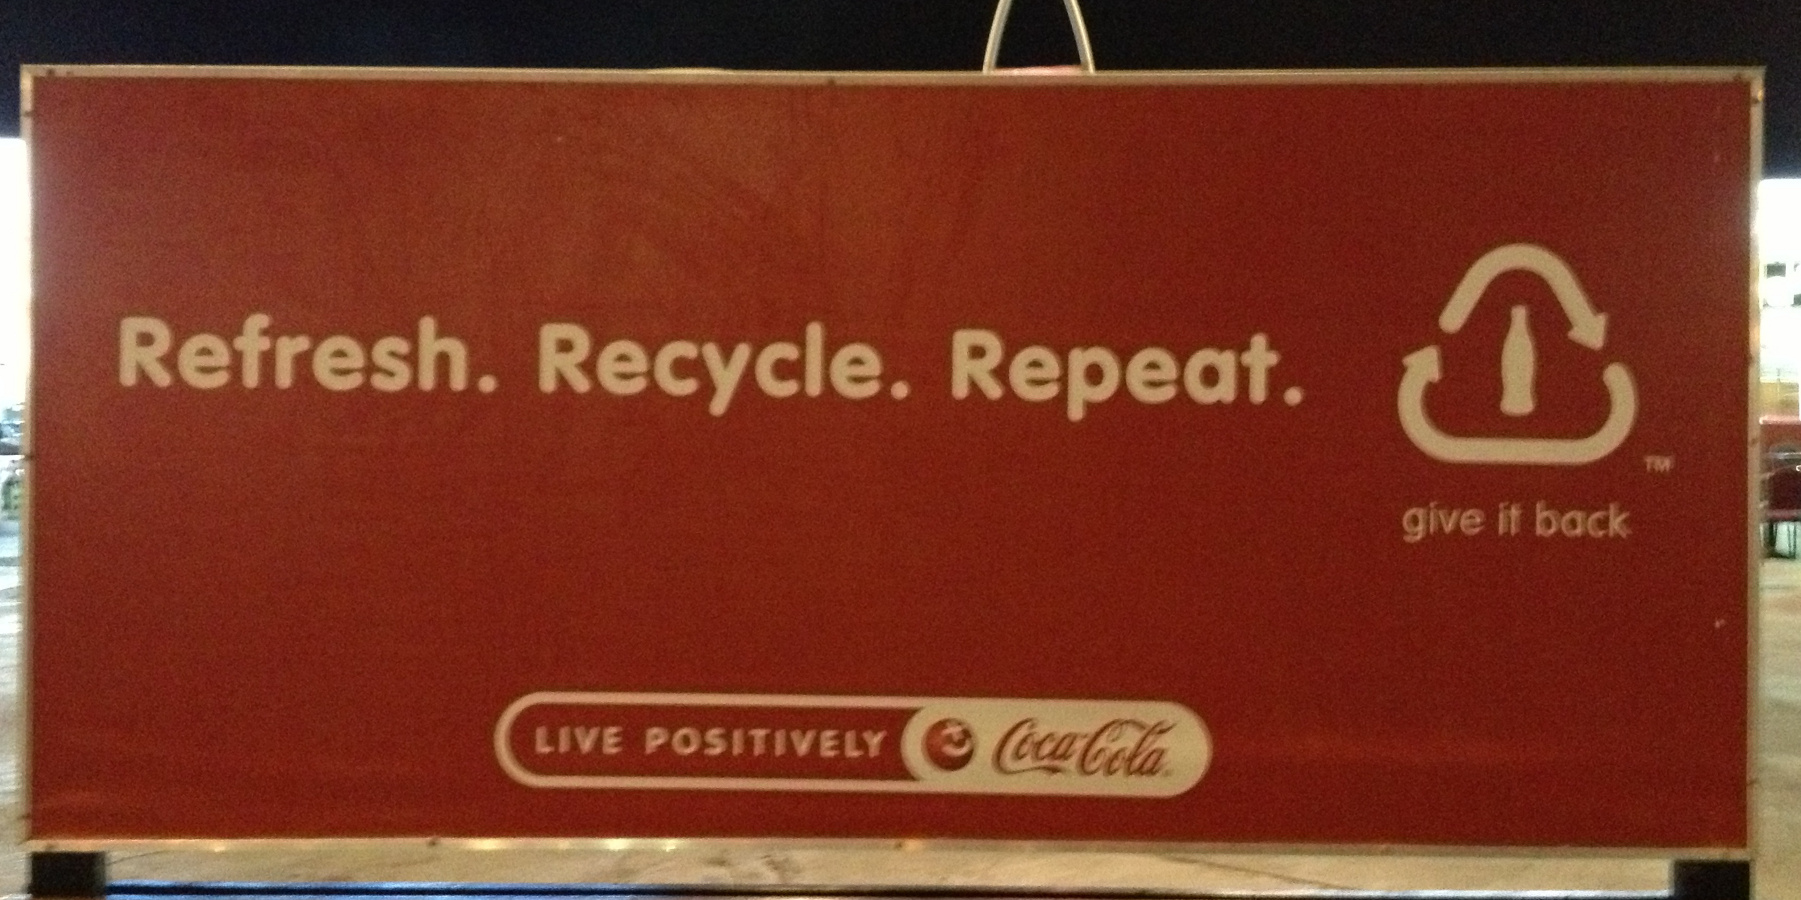 Refresh. Recycle. Repeat.